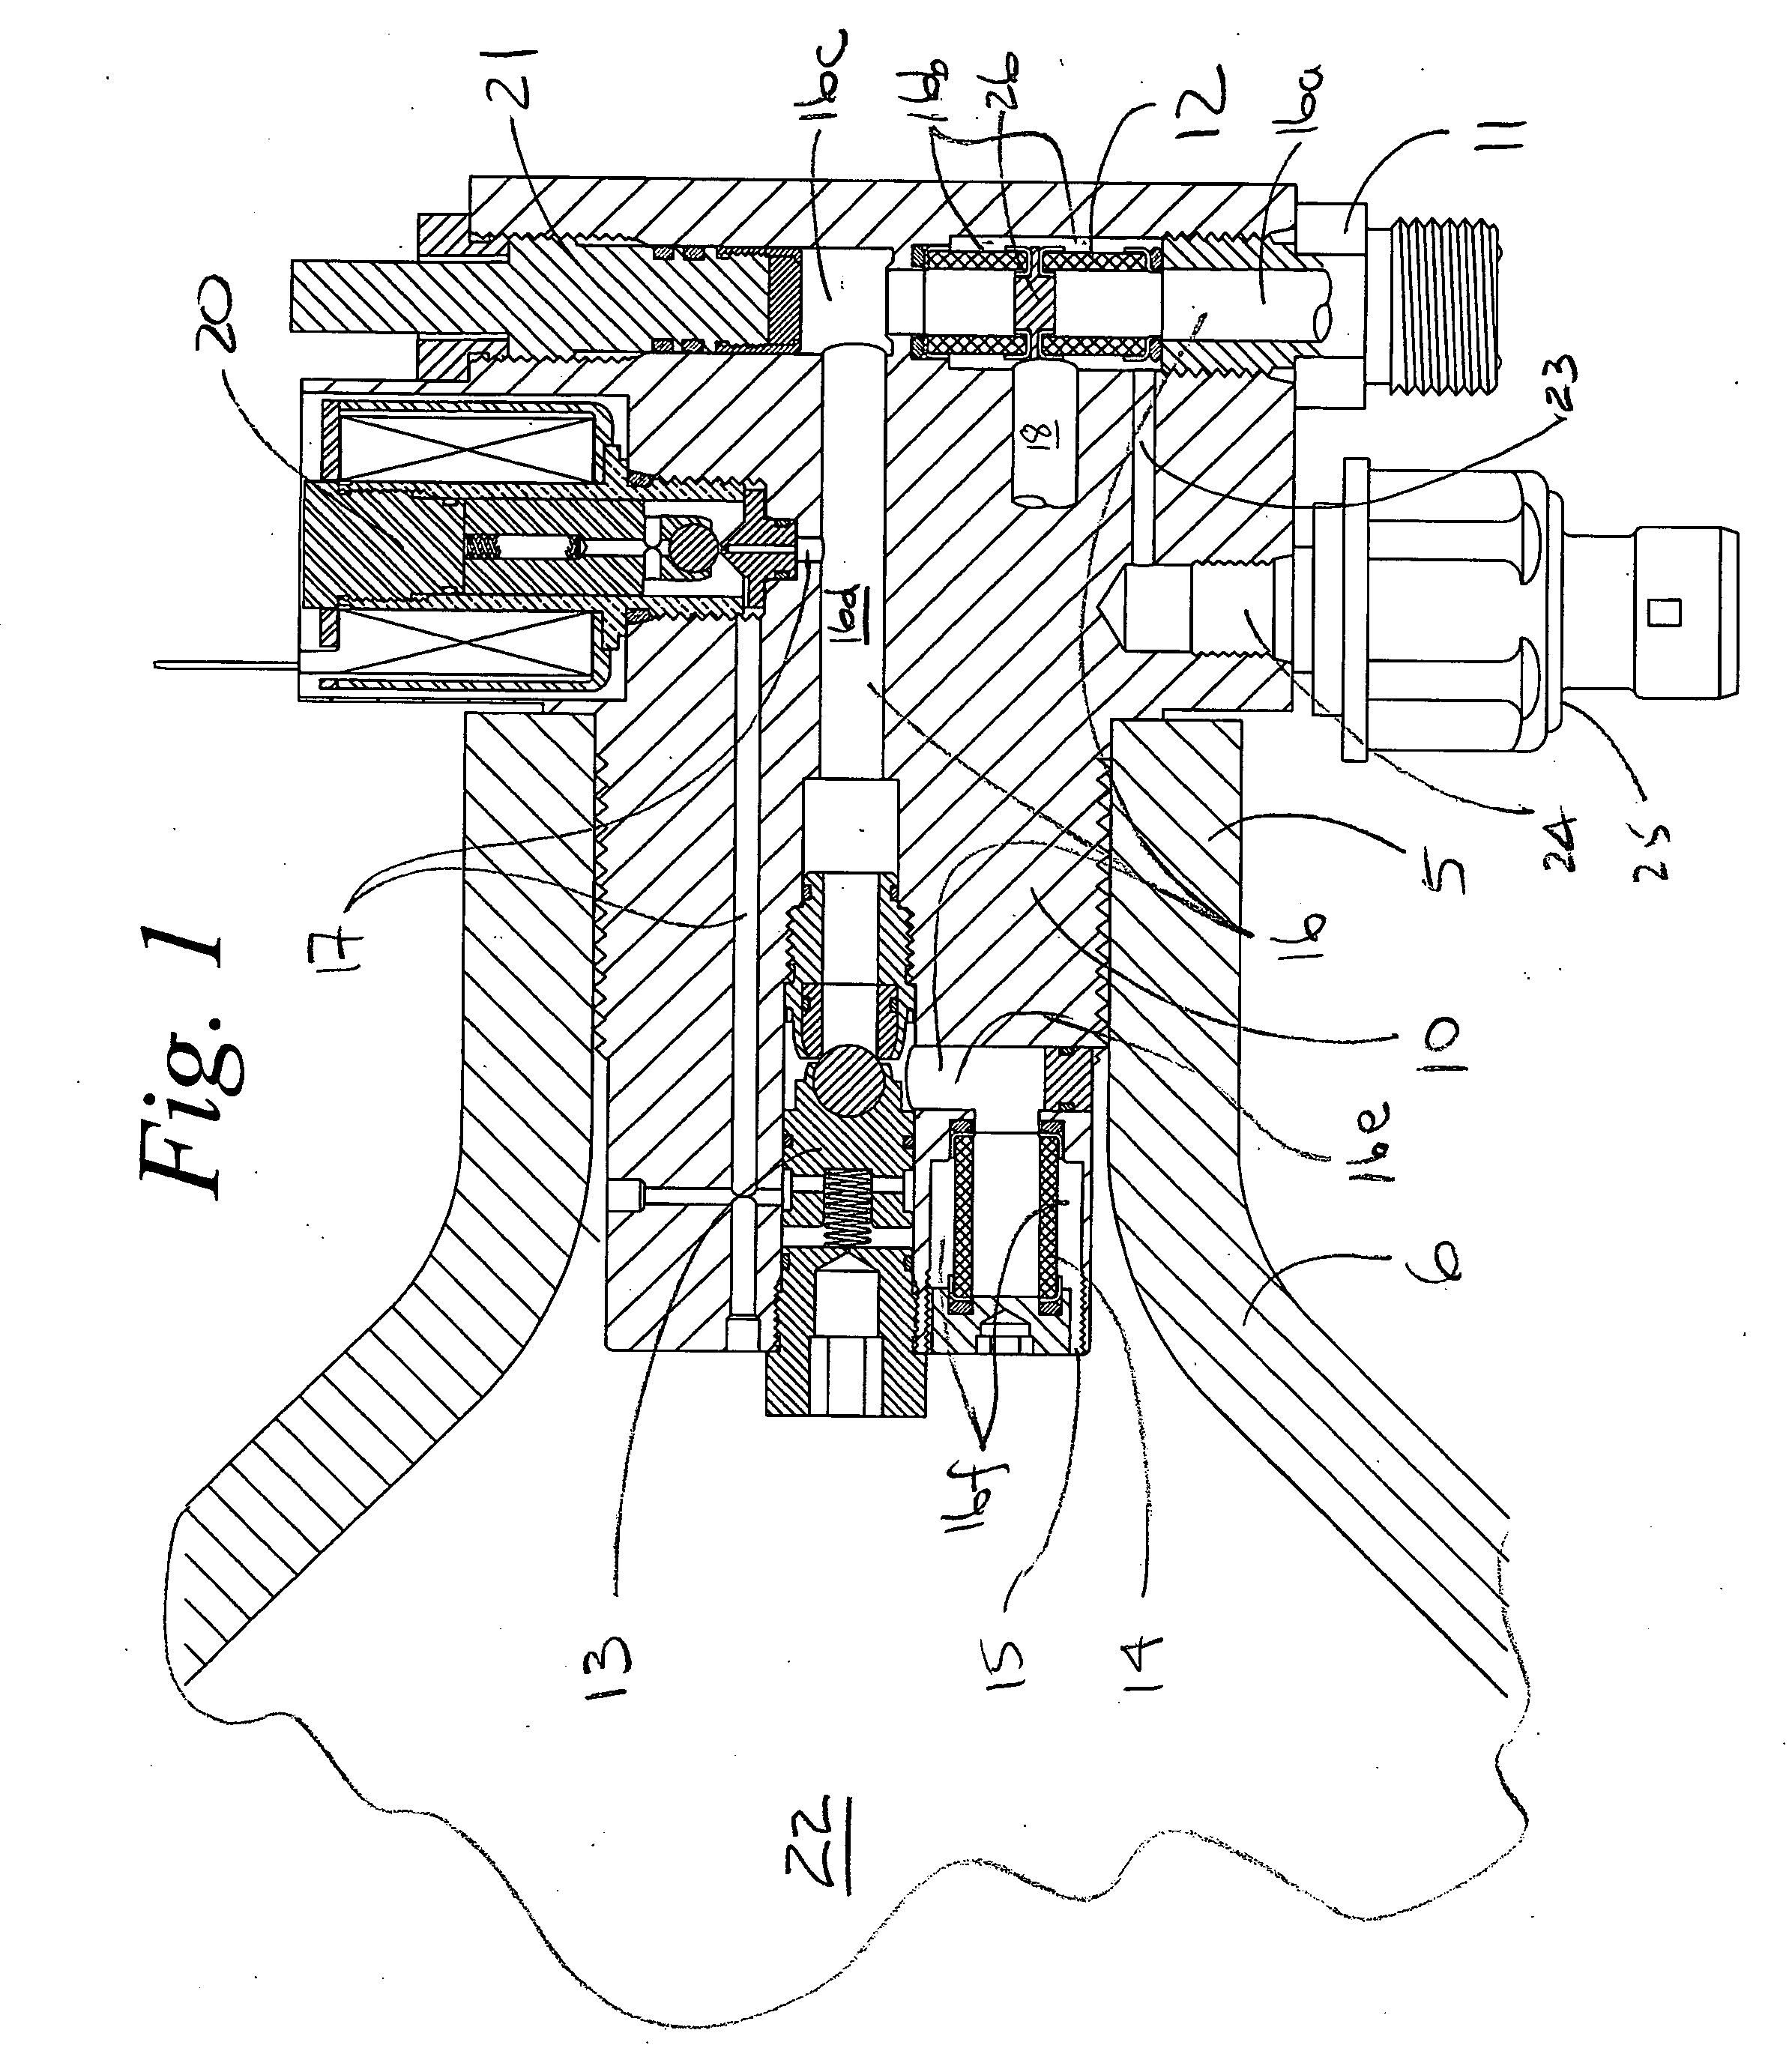 Flow control system for a valve